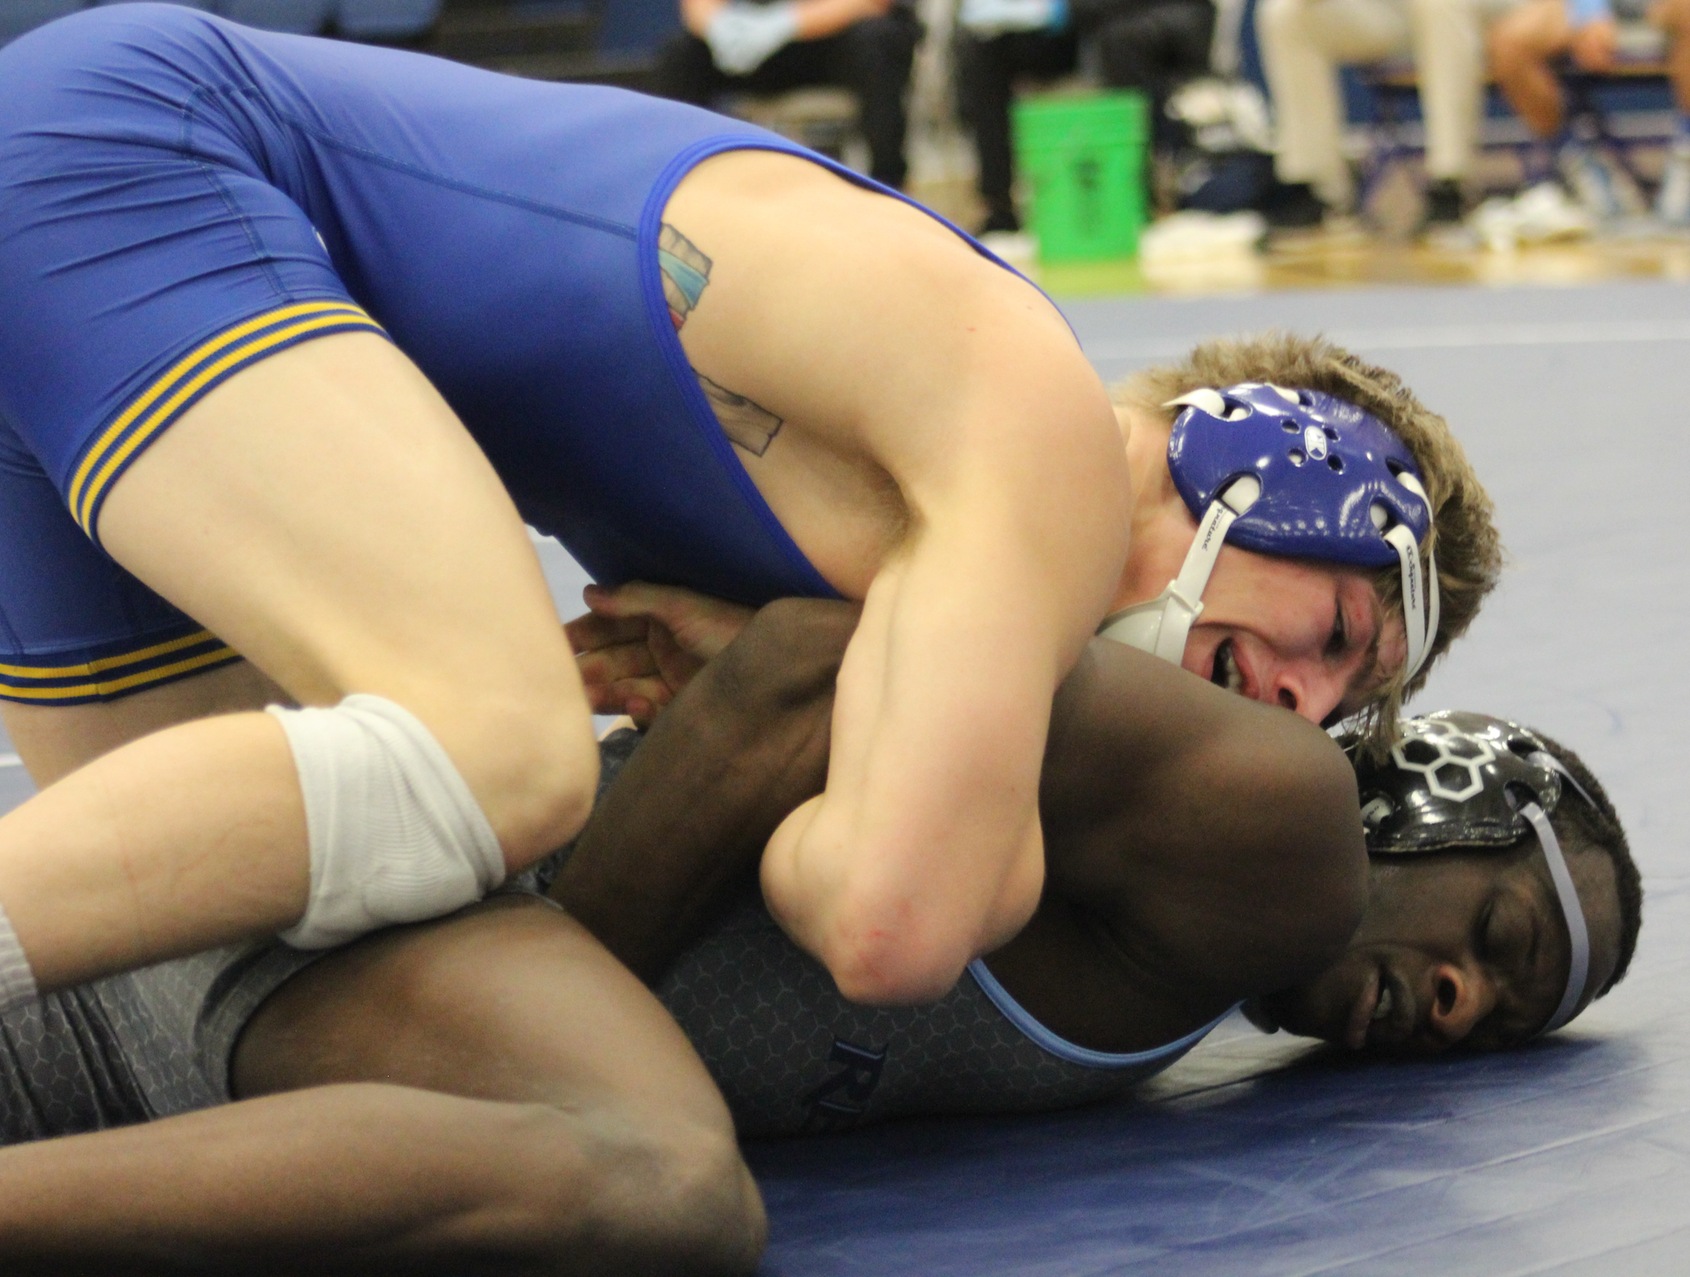 NIACC's Austin Anderly remains No. 1 at 141 pounds in the latest NJCAA Intermat rankings.